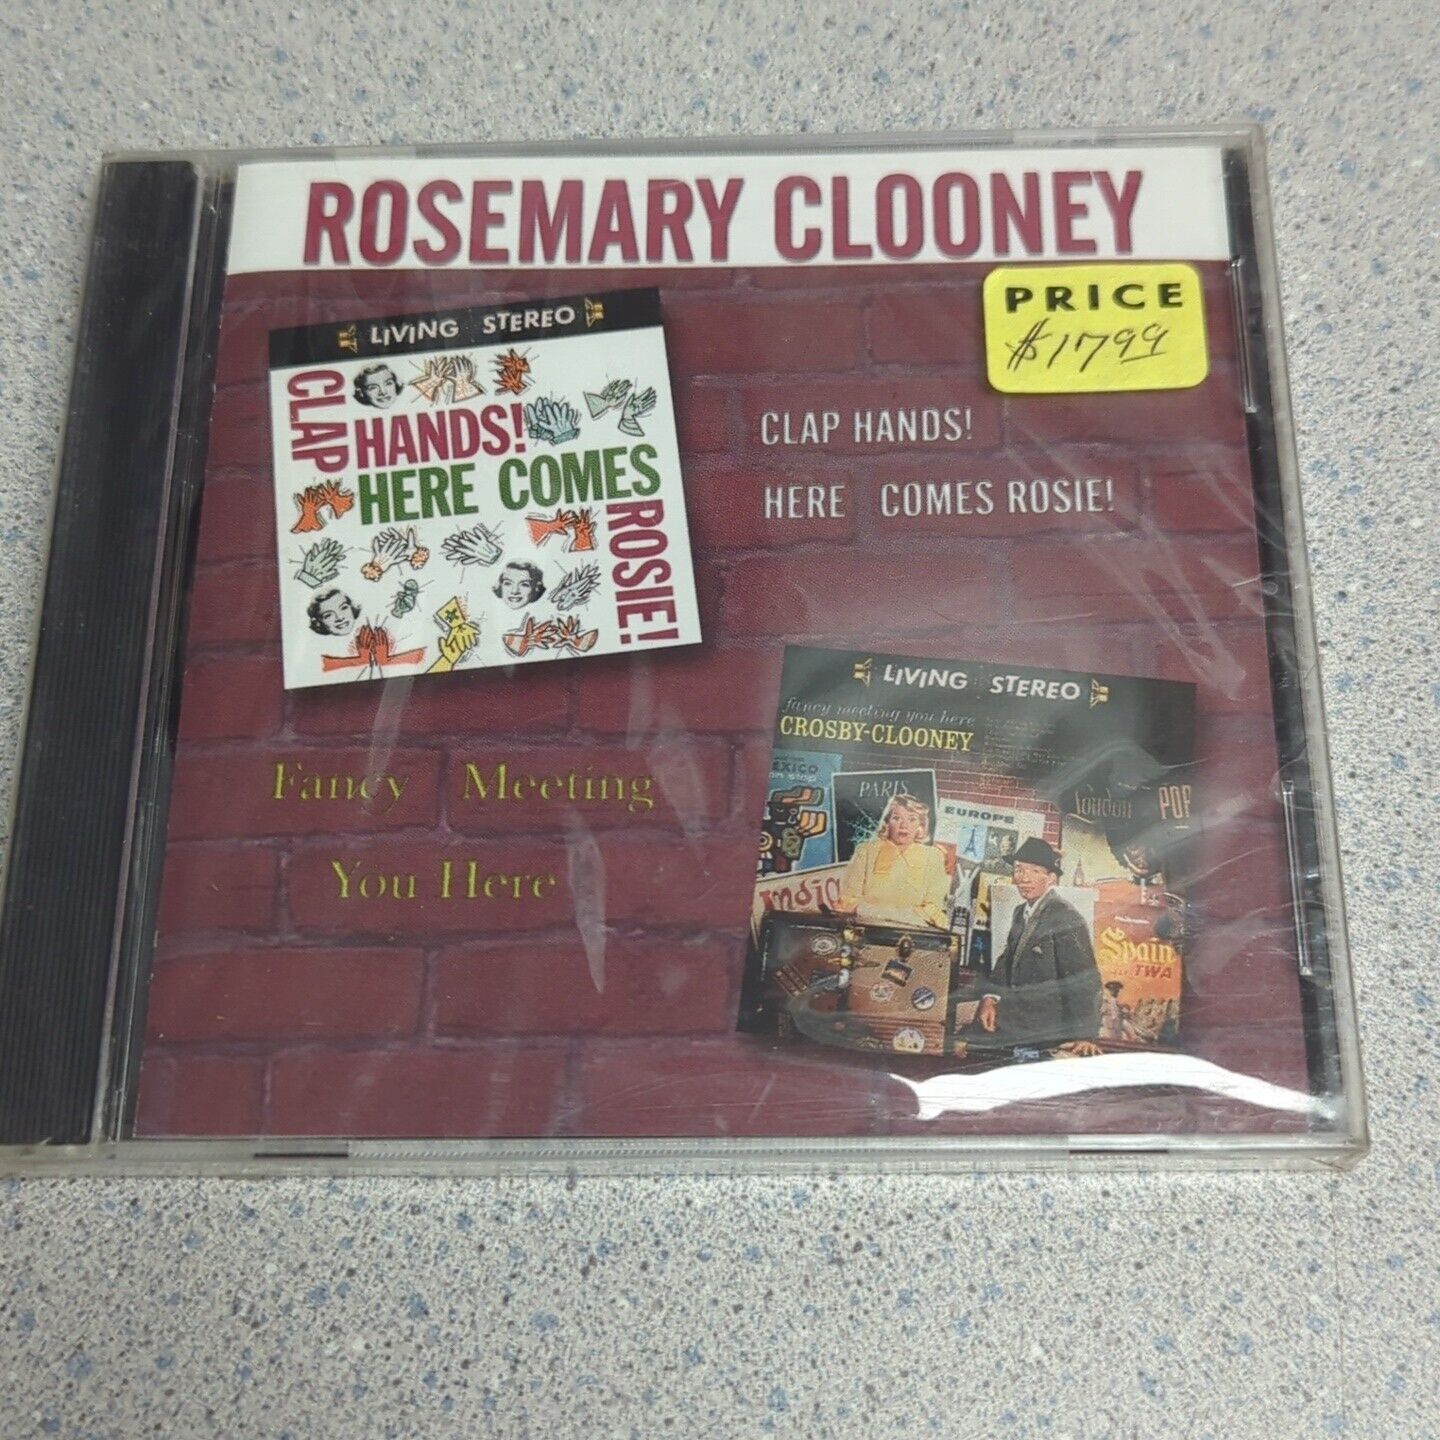 NEW Vintage Rosemary Clooney - Clap Hands Here Comes Rosie (CD, 1959)